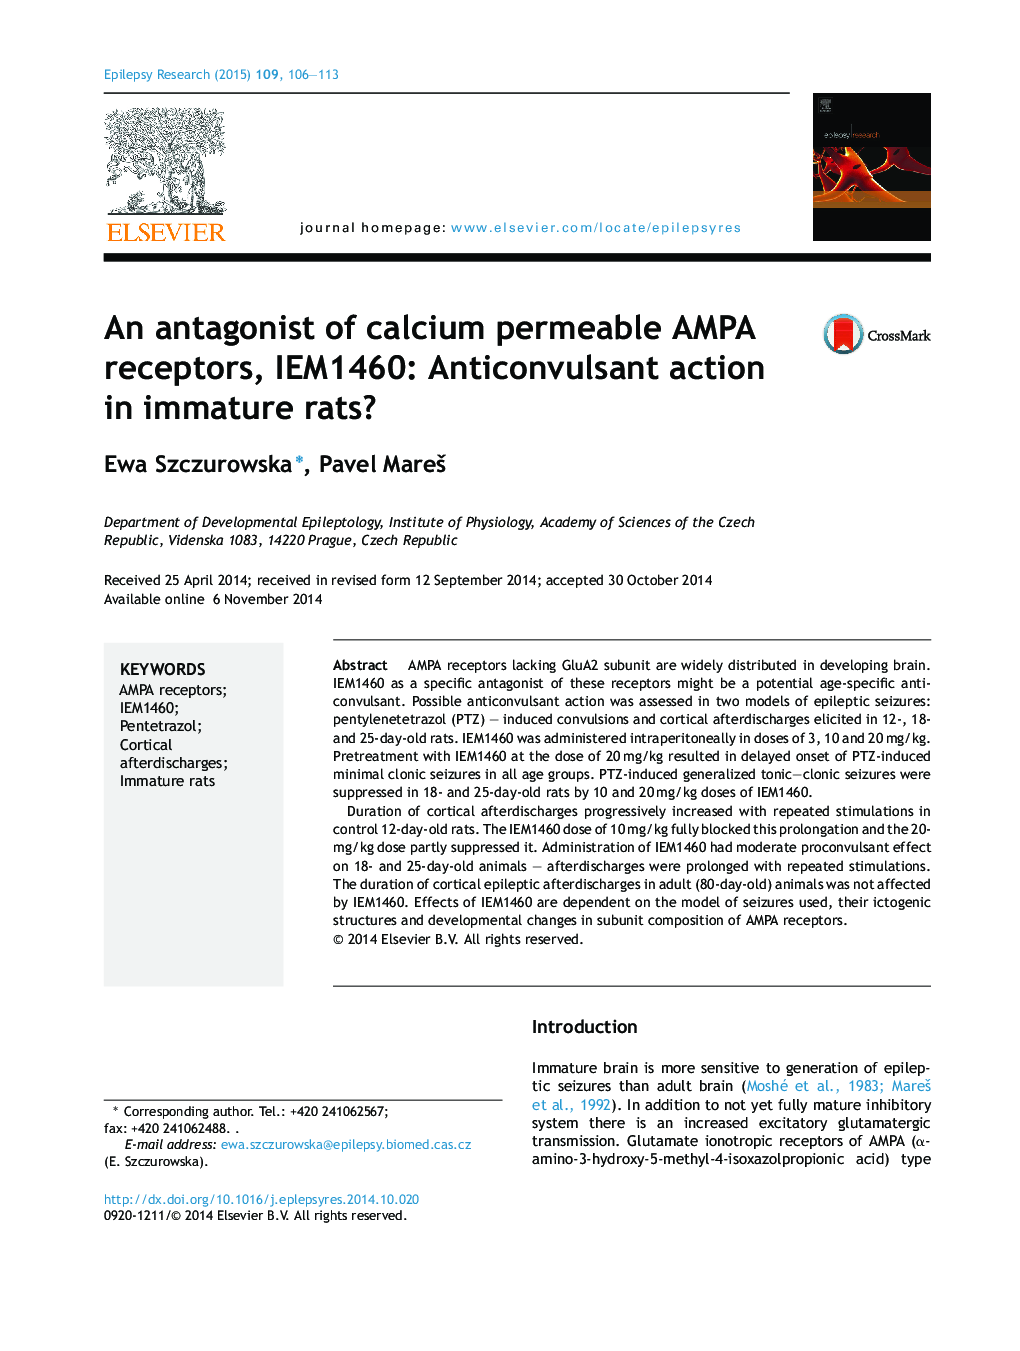 An antagonist of calcium permeable AMPA receptors, IEM1460: Anticonvulsant action in immature rats?